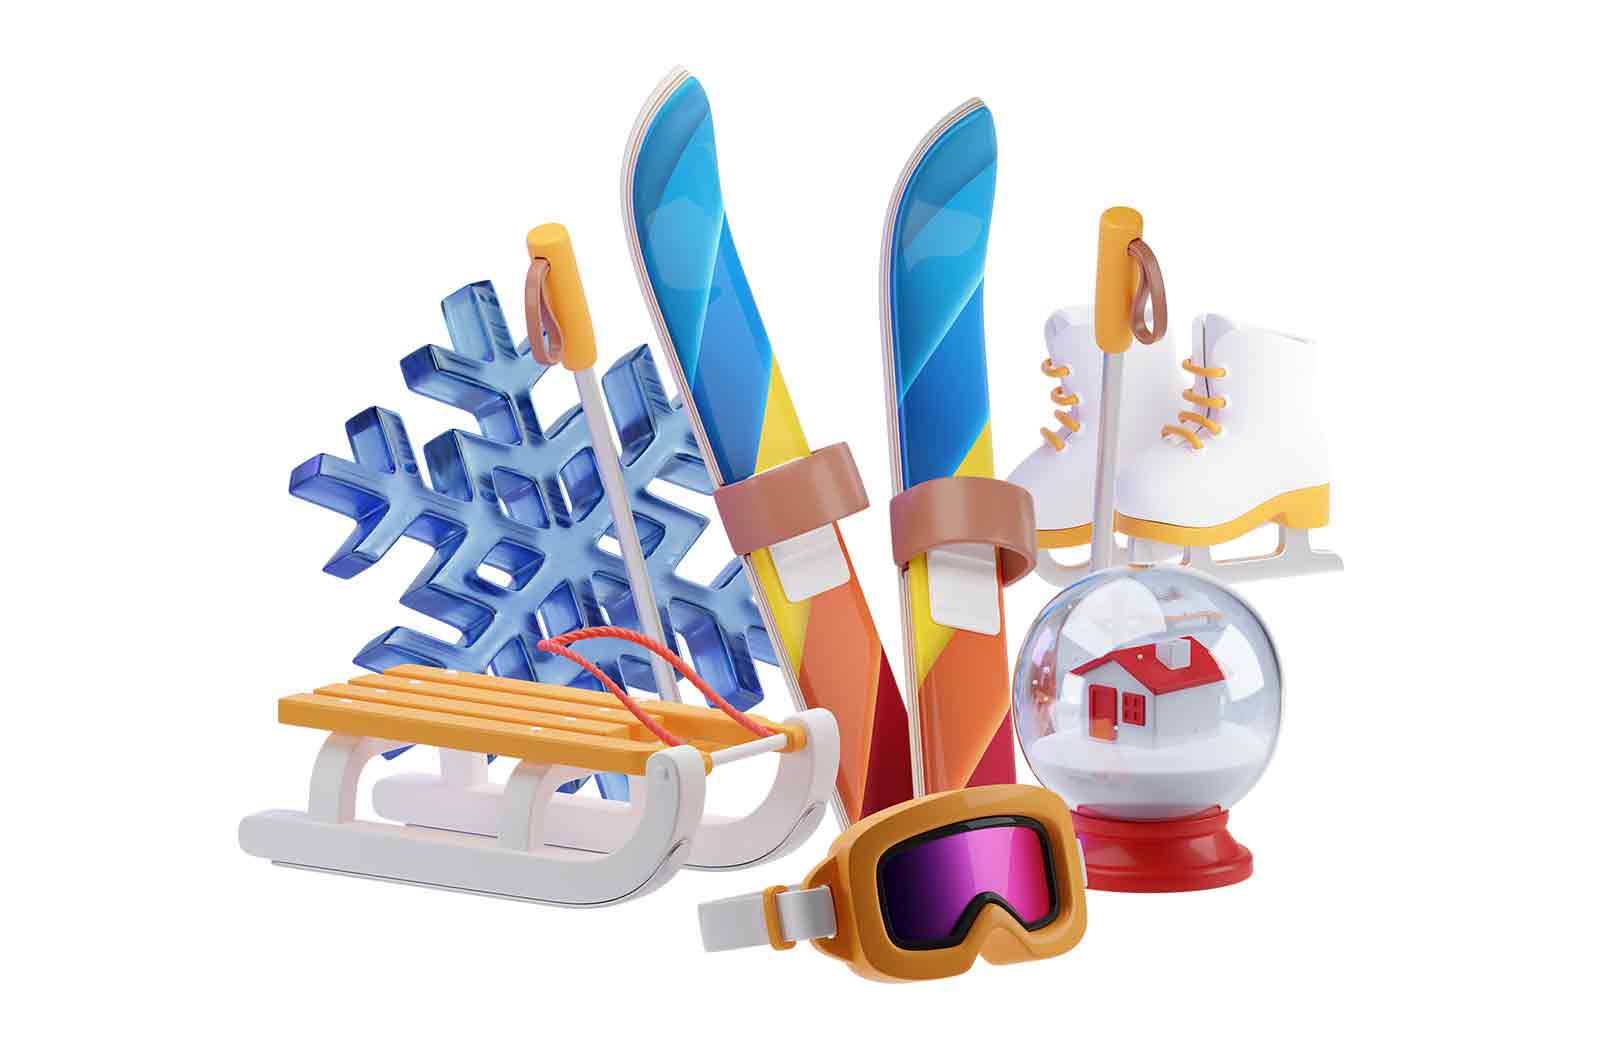 Winter objects 3d rendered illustration. Equipment for spending time in the winter season. Isolated on white.